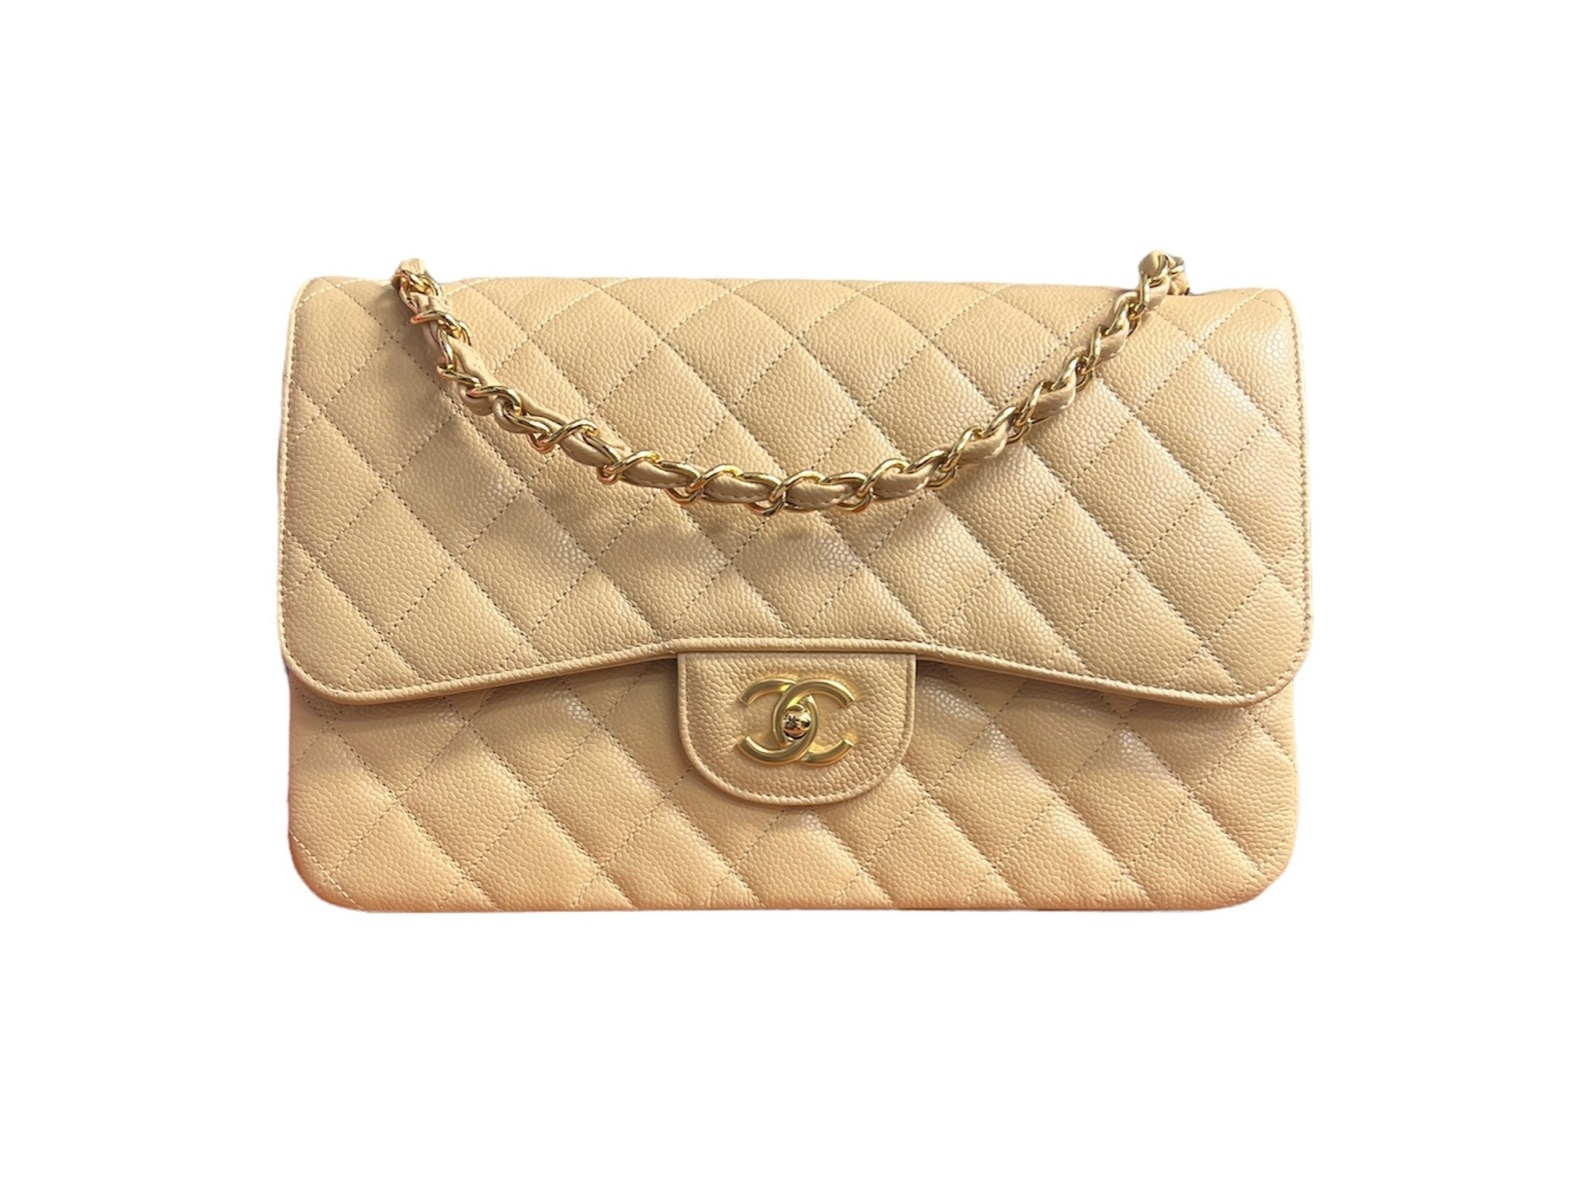 Chanel classic flap review a pink Chanel bag  Happy High Life